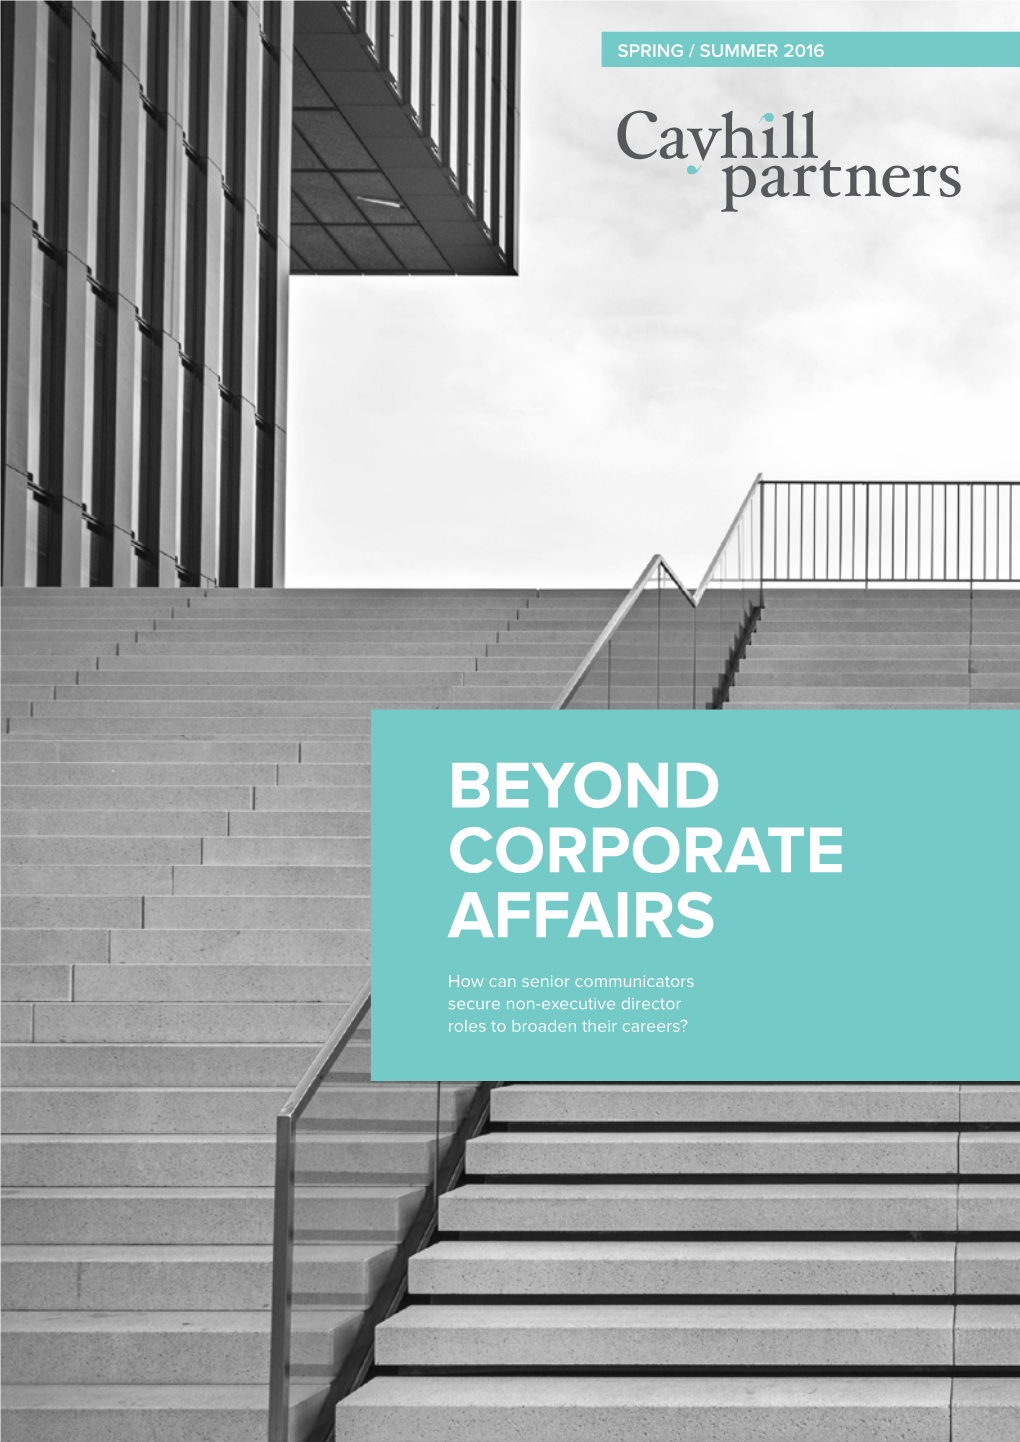 Beyond Corporate Affairs Introduction